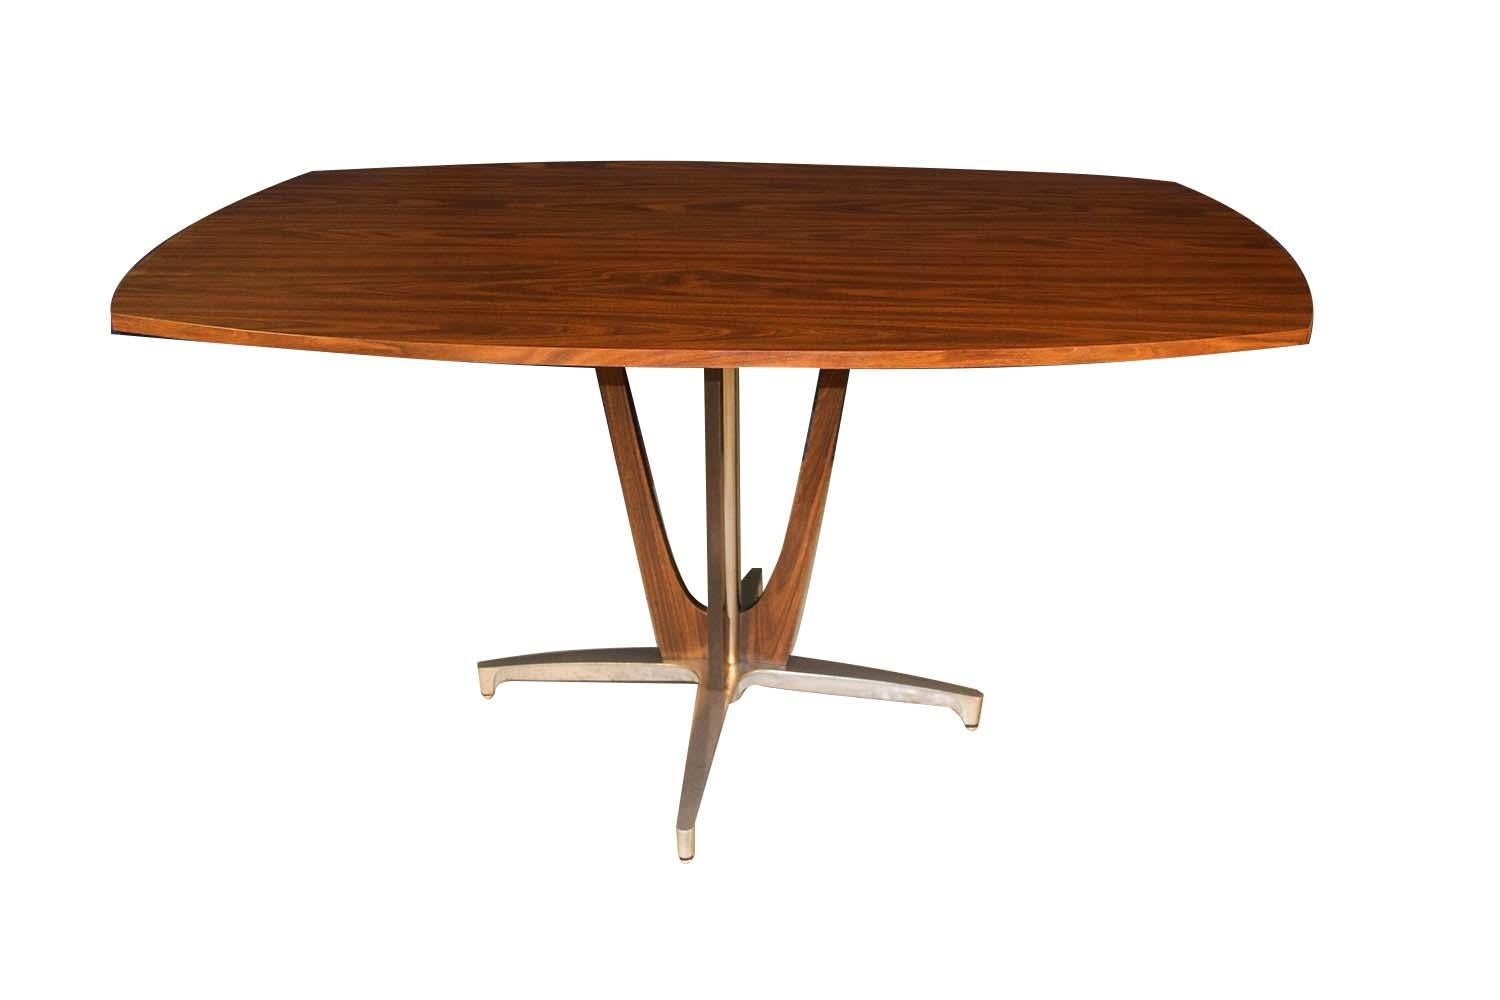 Vintage Mid-Century Modern ’69 Chromcraft oval dining table. This beautiful, retro, Chromcraft table features a walnut laminate with a flared veneer and polished chrome pedestal base and a chrome star 4-legged base. The table is very durable and